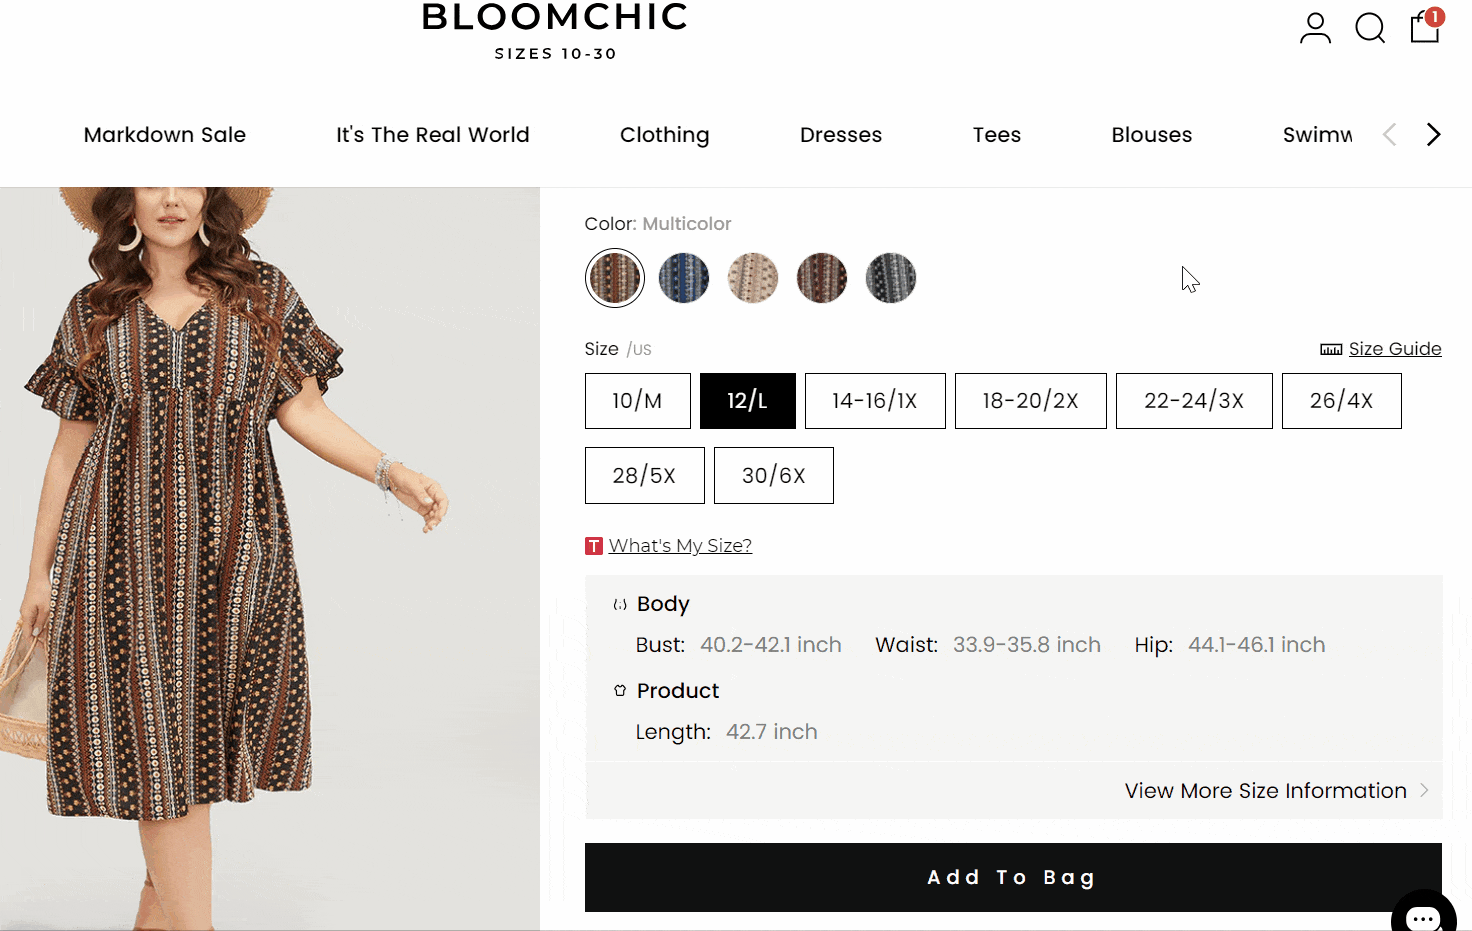 Is BloomChic Legit? (Let's Uncover The Truth)